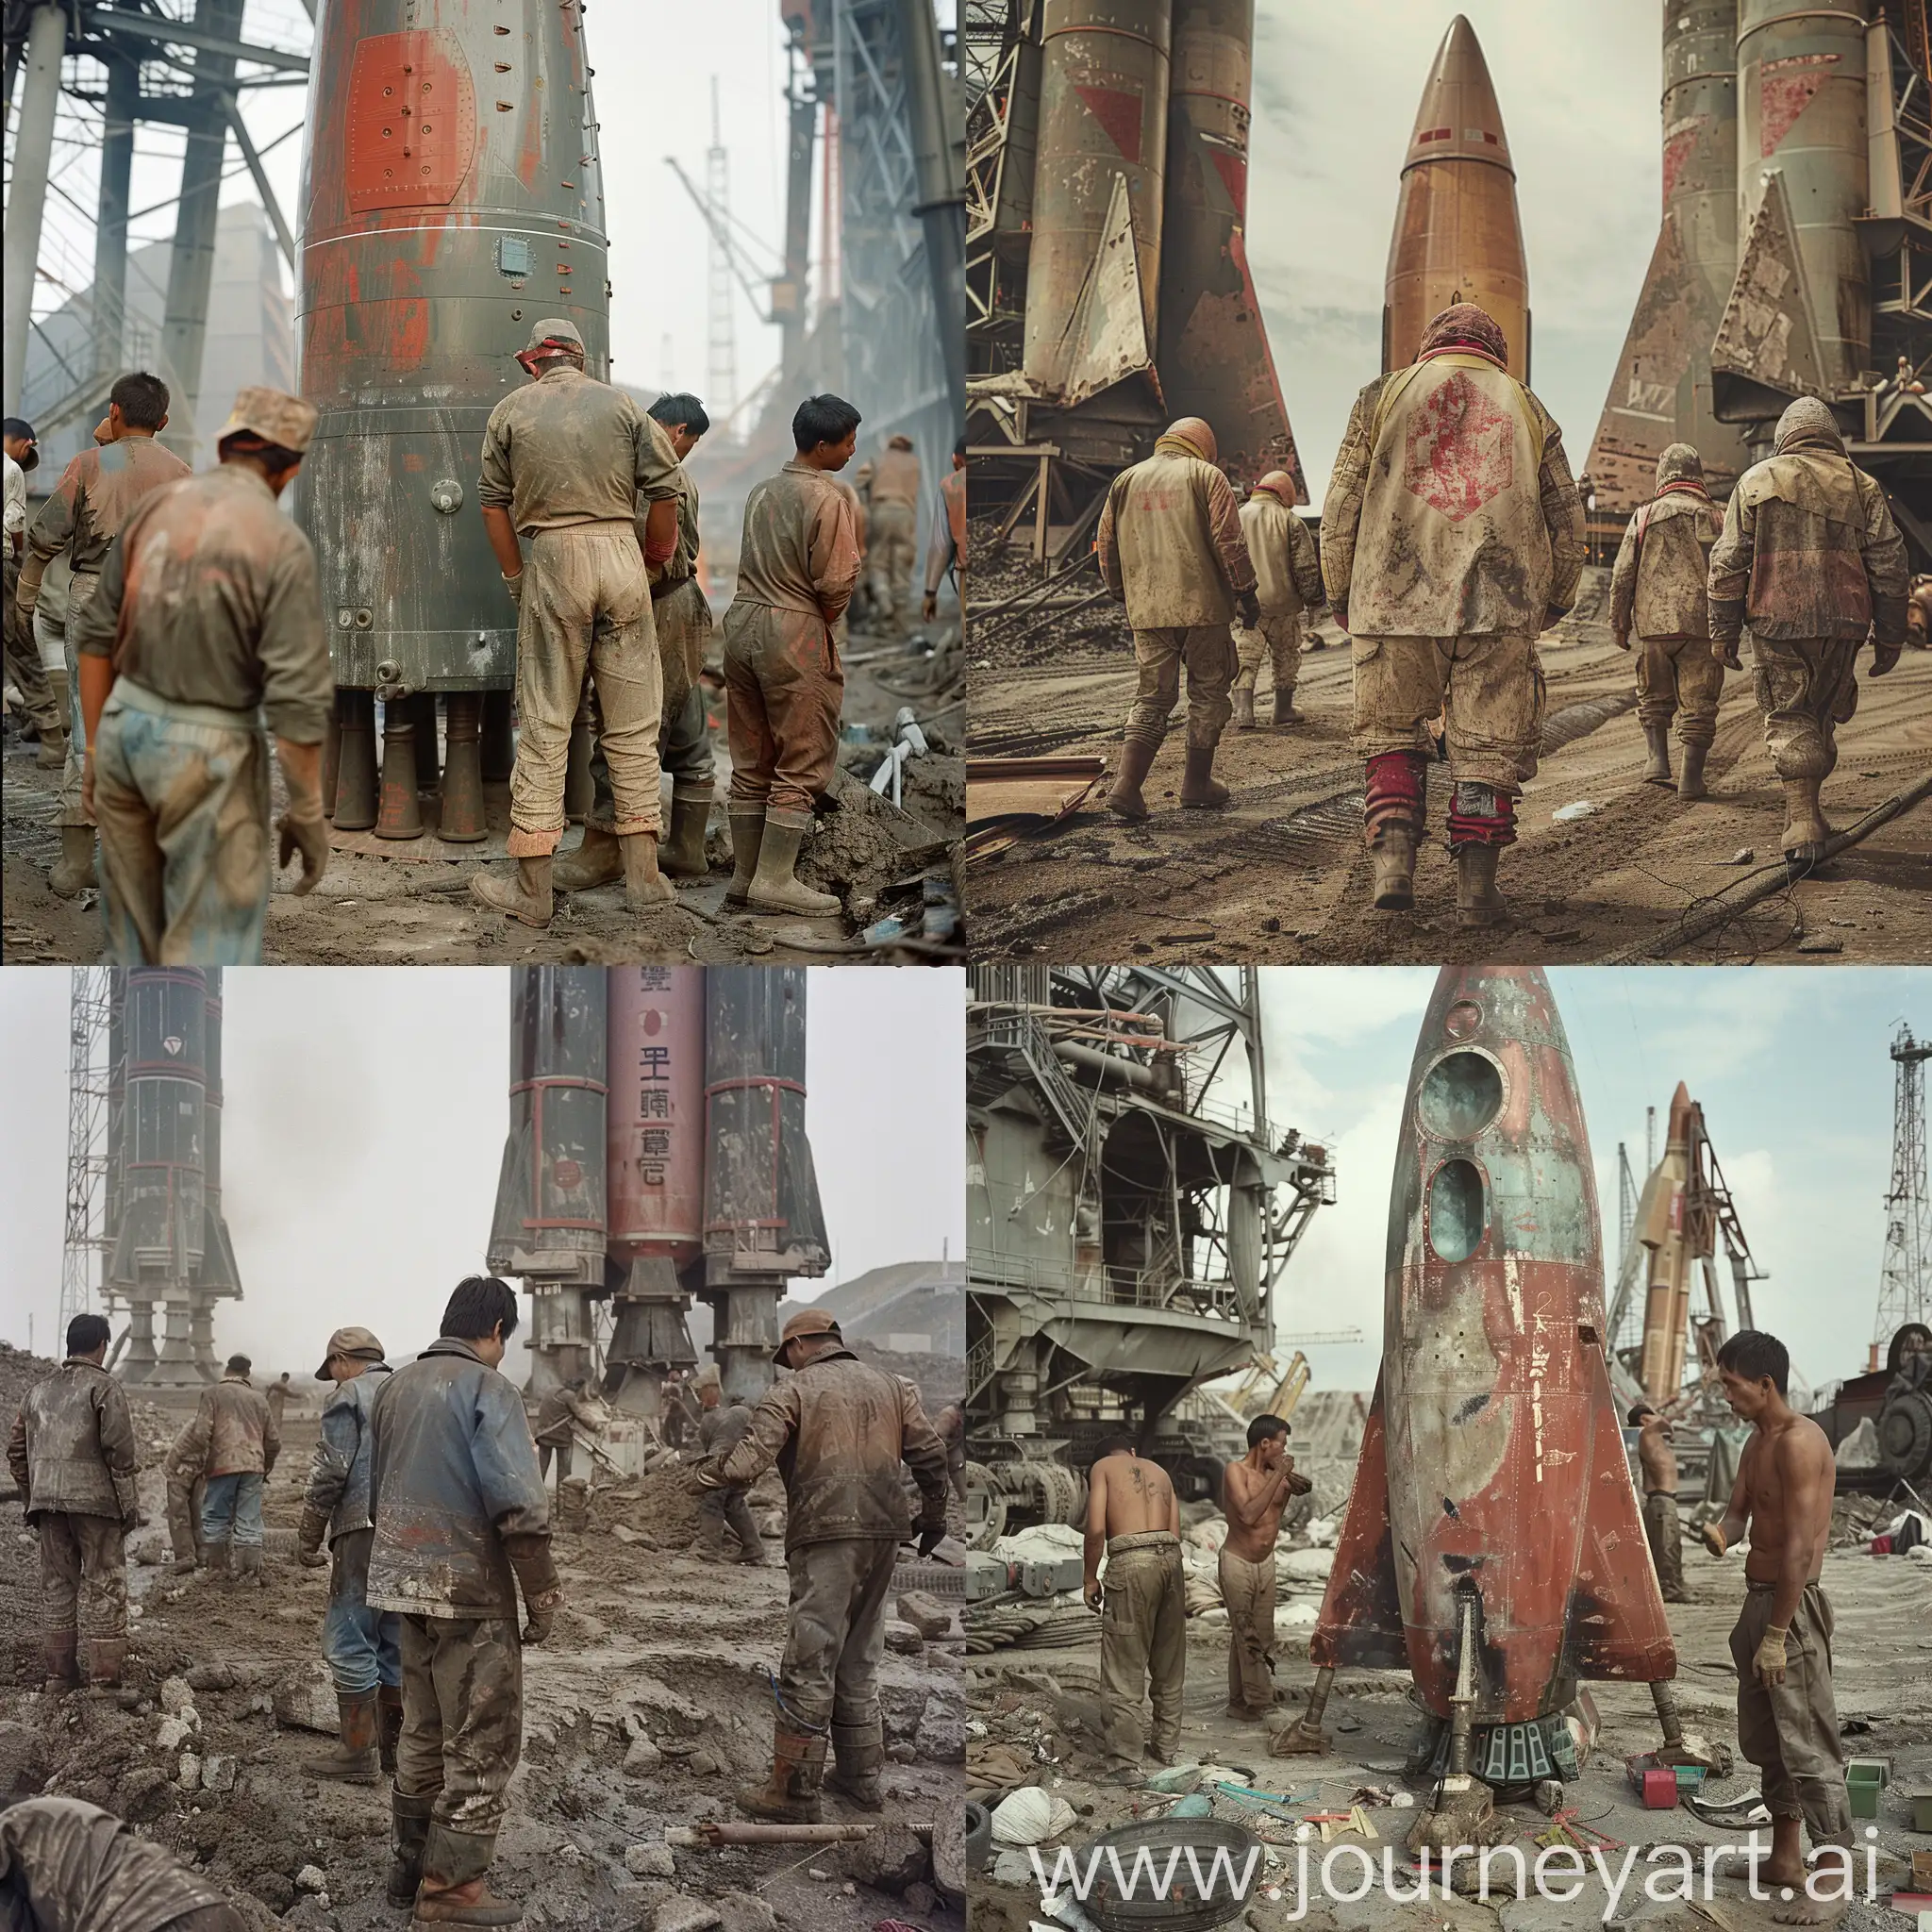 Dedicated-Workers-at-Rocket-Launch-Site-in-WornOut-Attire